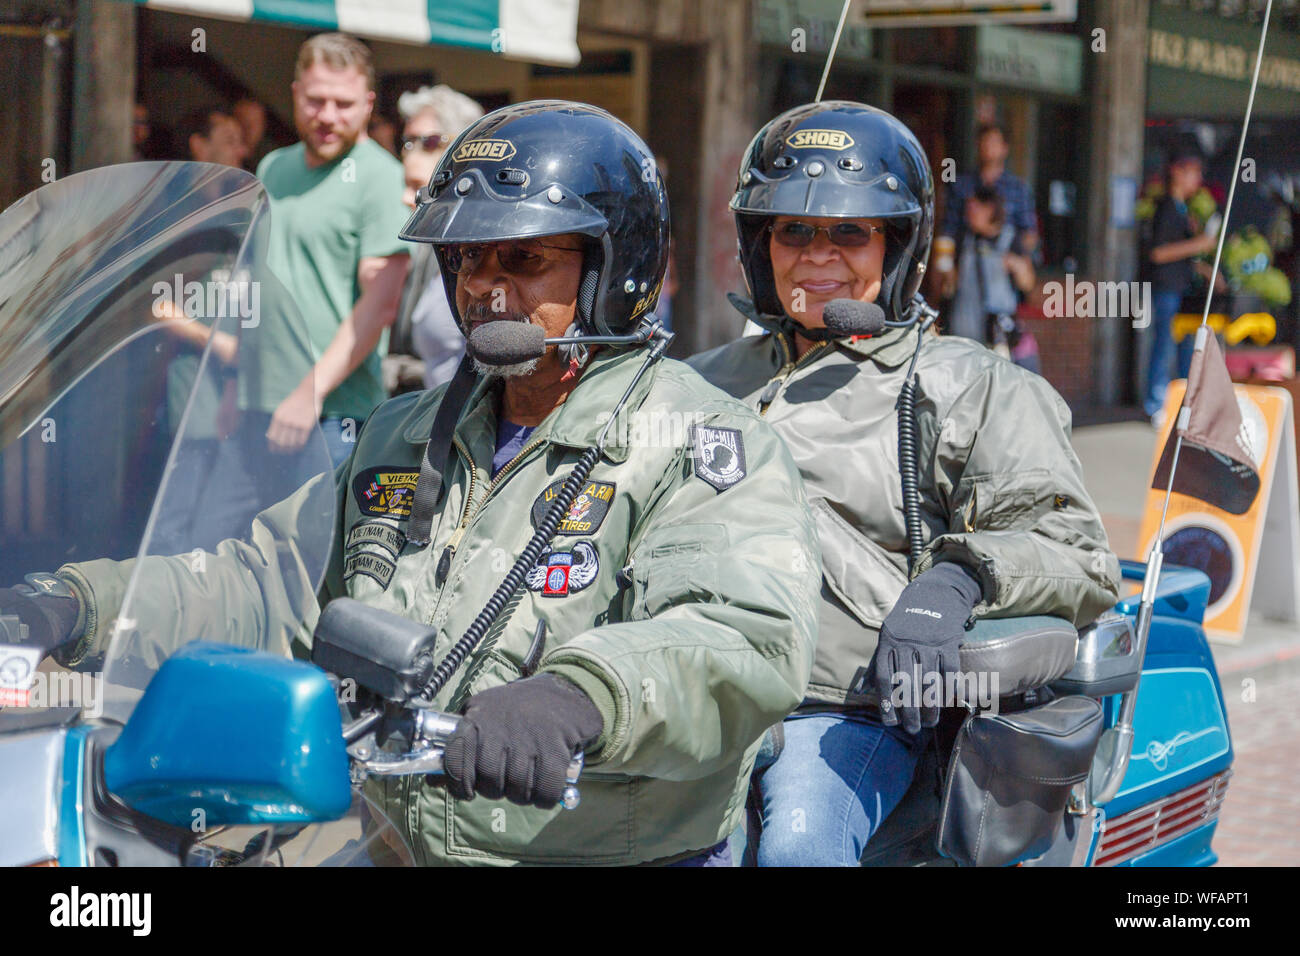 A senior couple ride on a large motorcycle through a market street with smile on their faces at Pike Place Market, Seattle, Washington, USA. Stock Photo